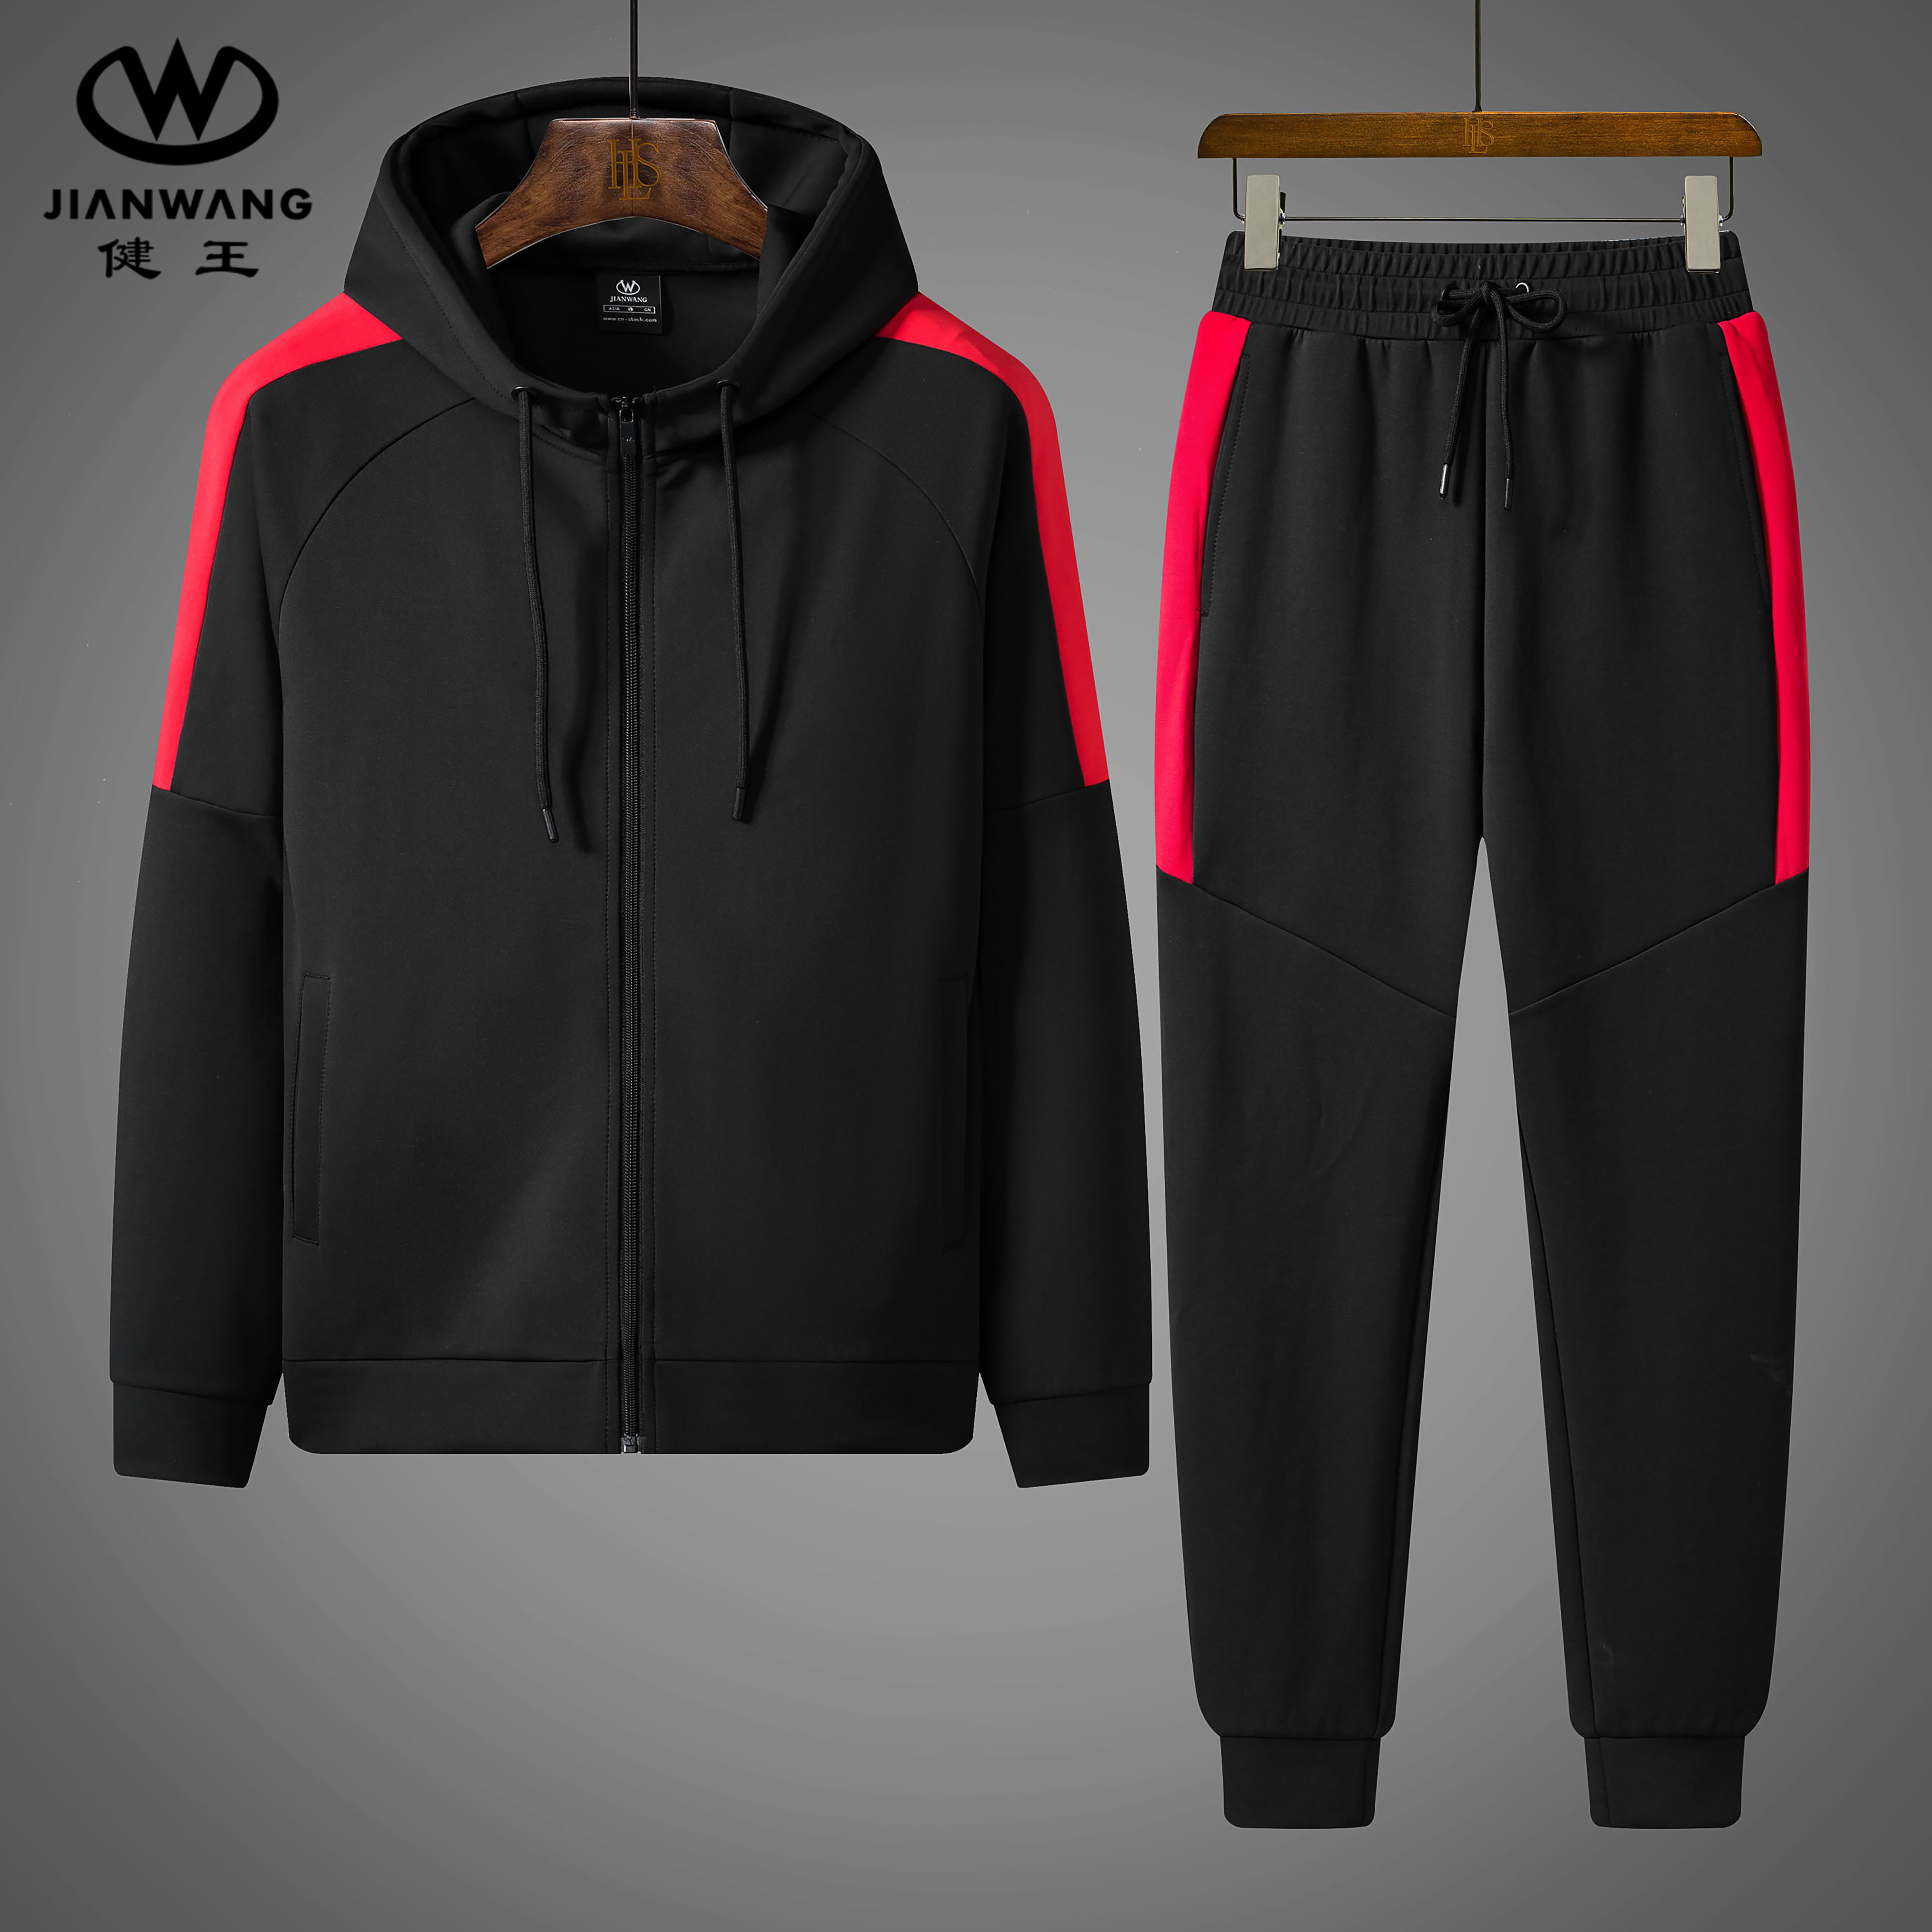 CONTRAST COLOE JACKET WITH HOOD + CONTRAST SIDE PANT